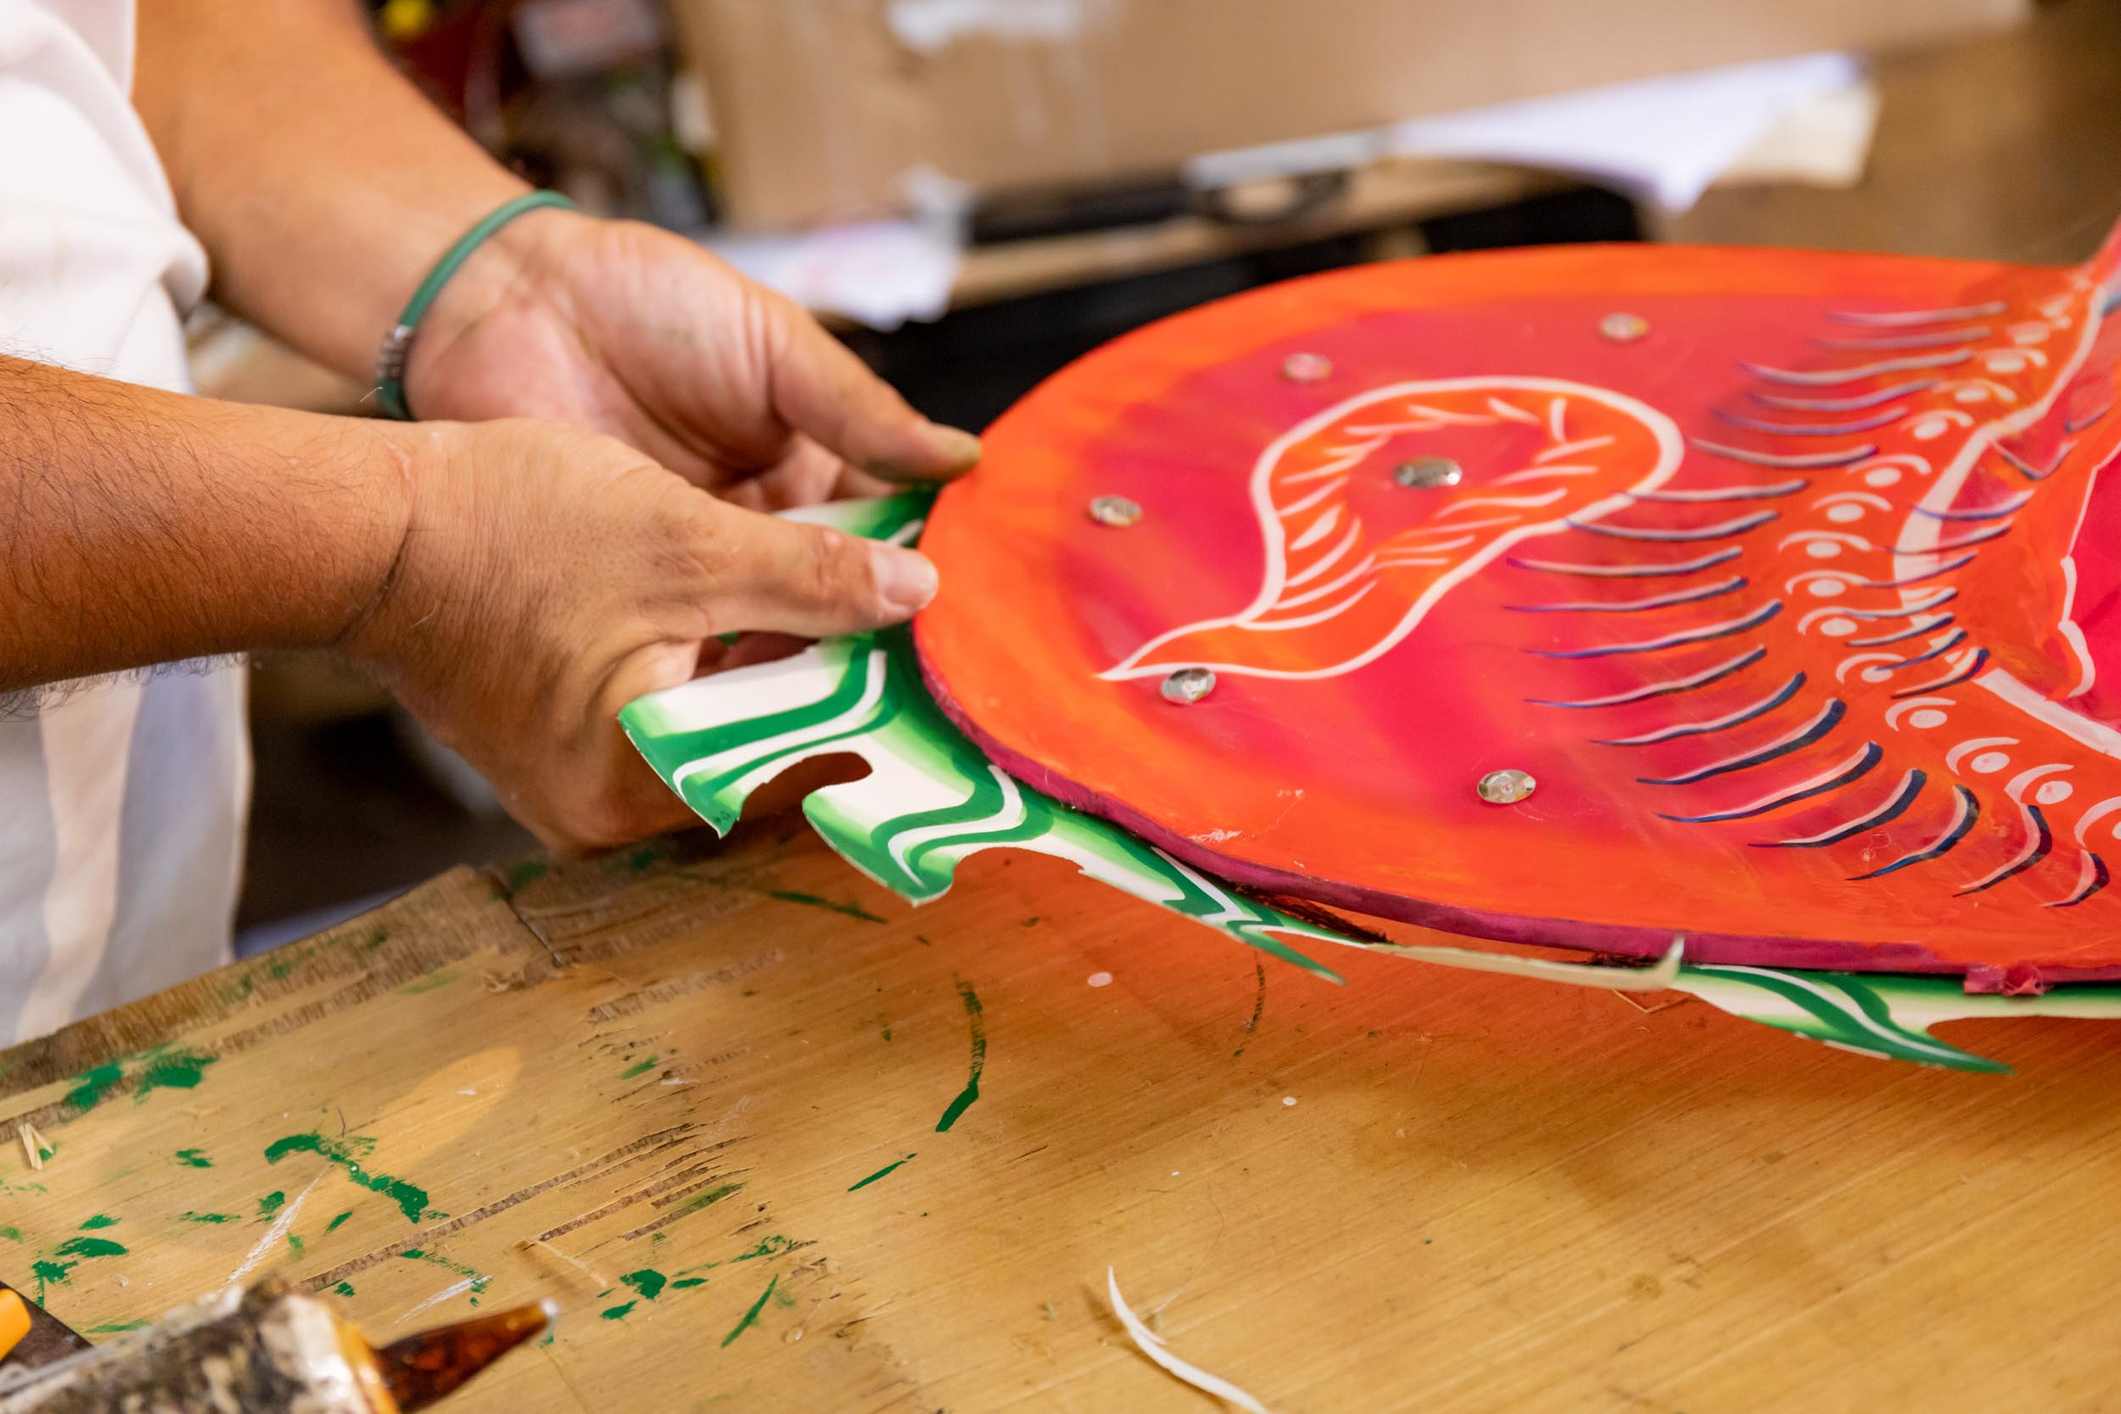 Hong Kong Intangible Cultural Heritage – Exhibition on Traditional Paper Crafting